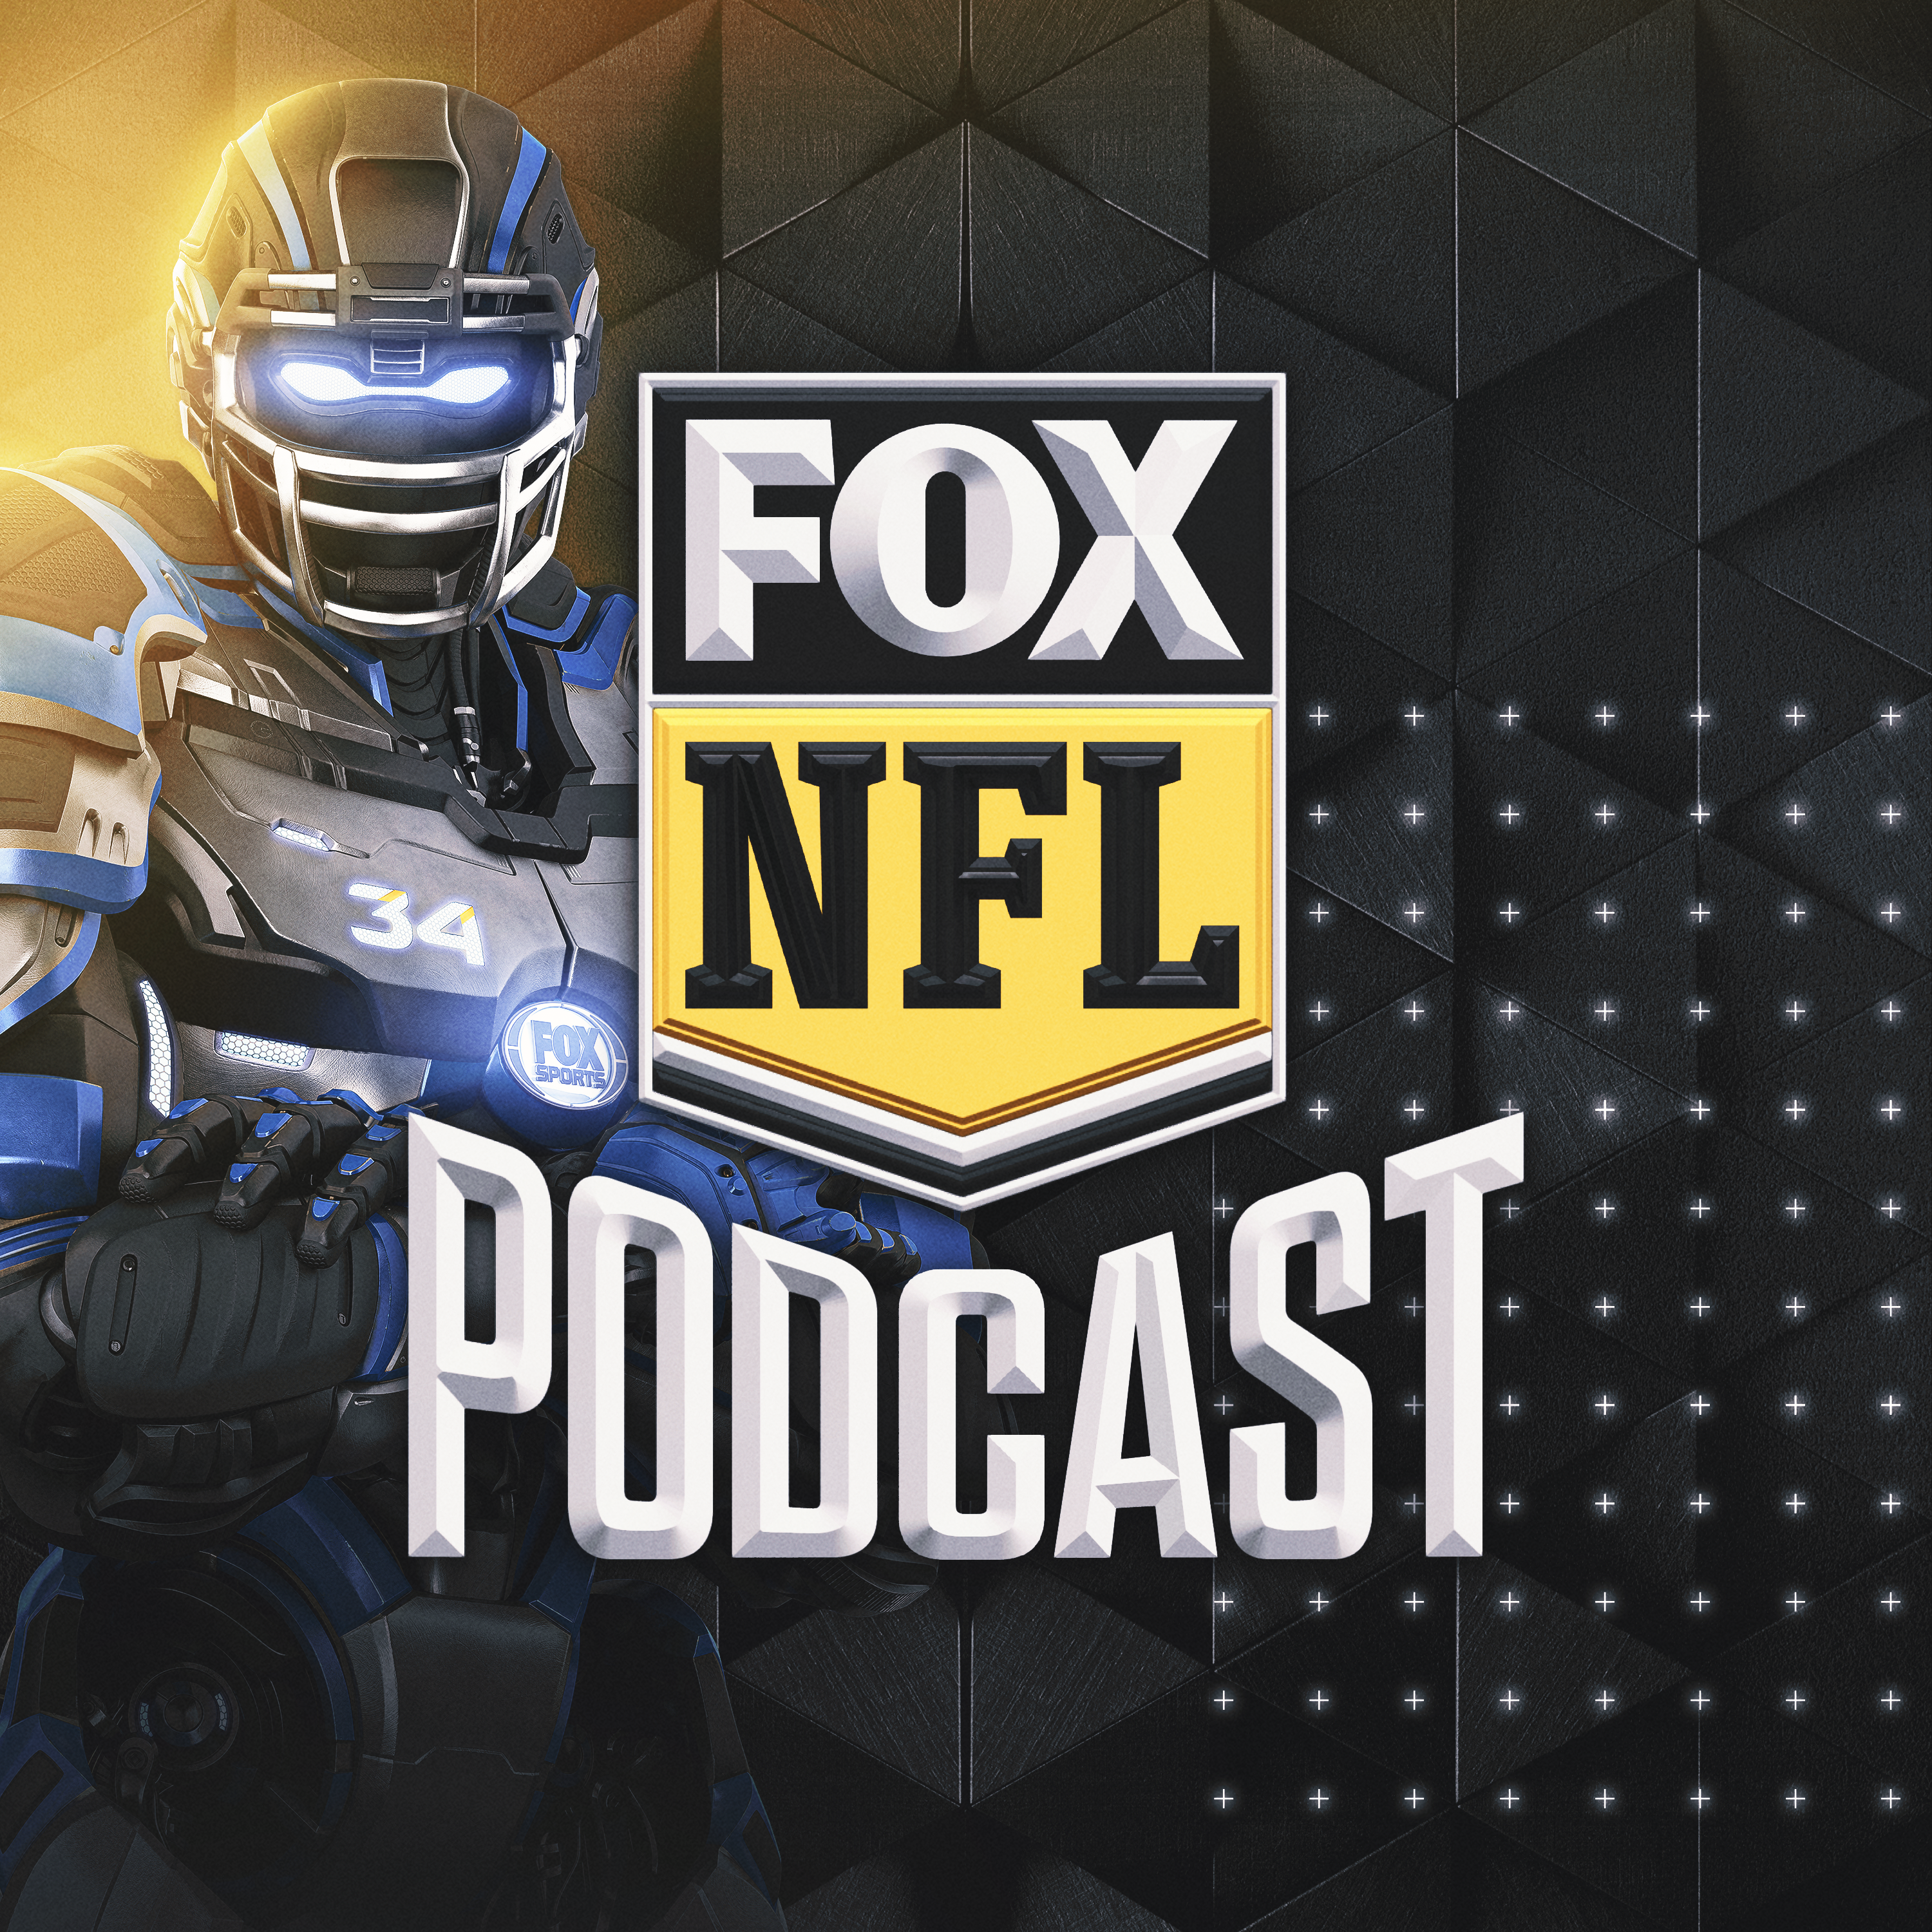 The NFL on FOX Podcast